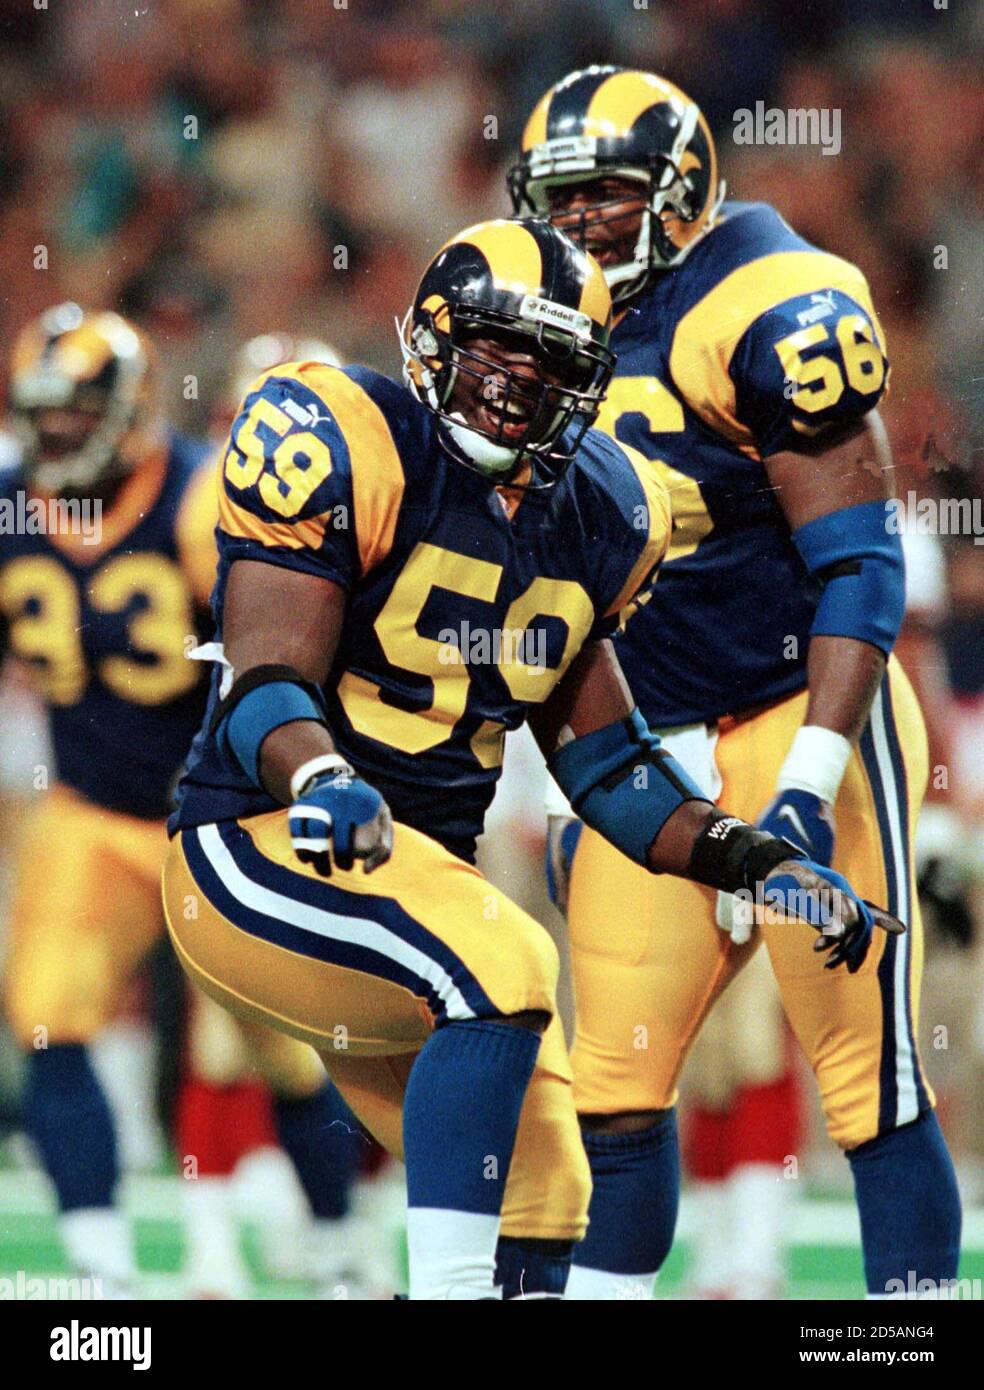 st-louis-rams-london-fletcher-59-and-mike-morton-58-celebrate-stopping-a-san-francisco-49ers-drive-in-the-first-quarter-at-the-twa-dome-in-st-louis-october-10-tpsv-2D5ANG4.jpg